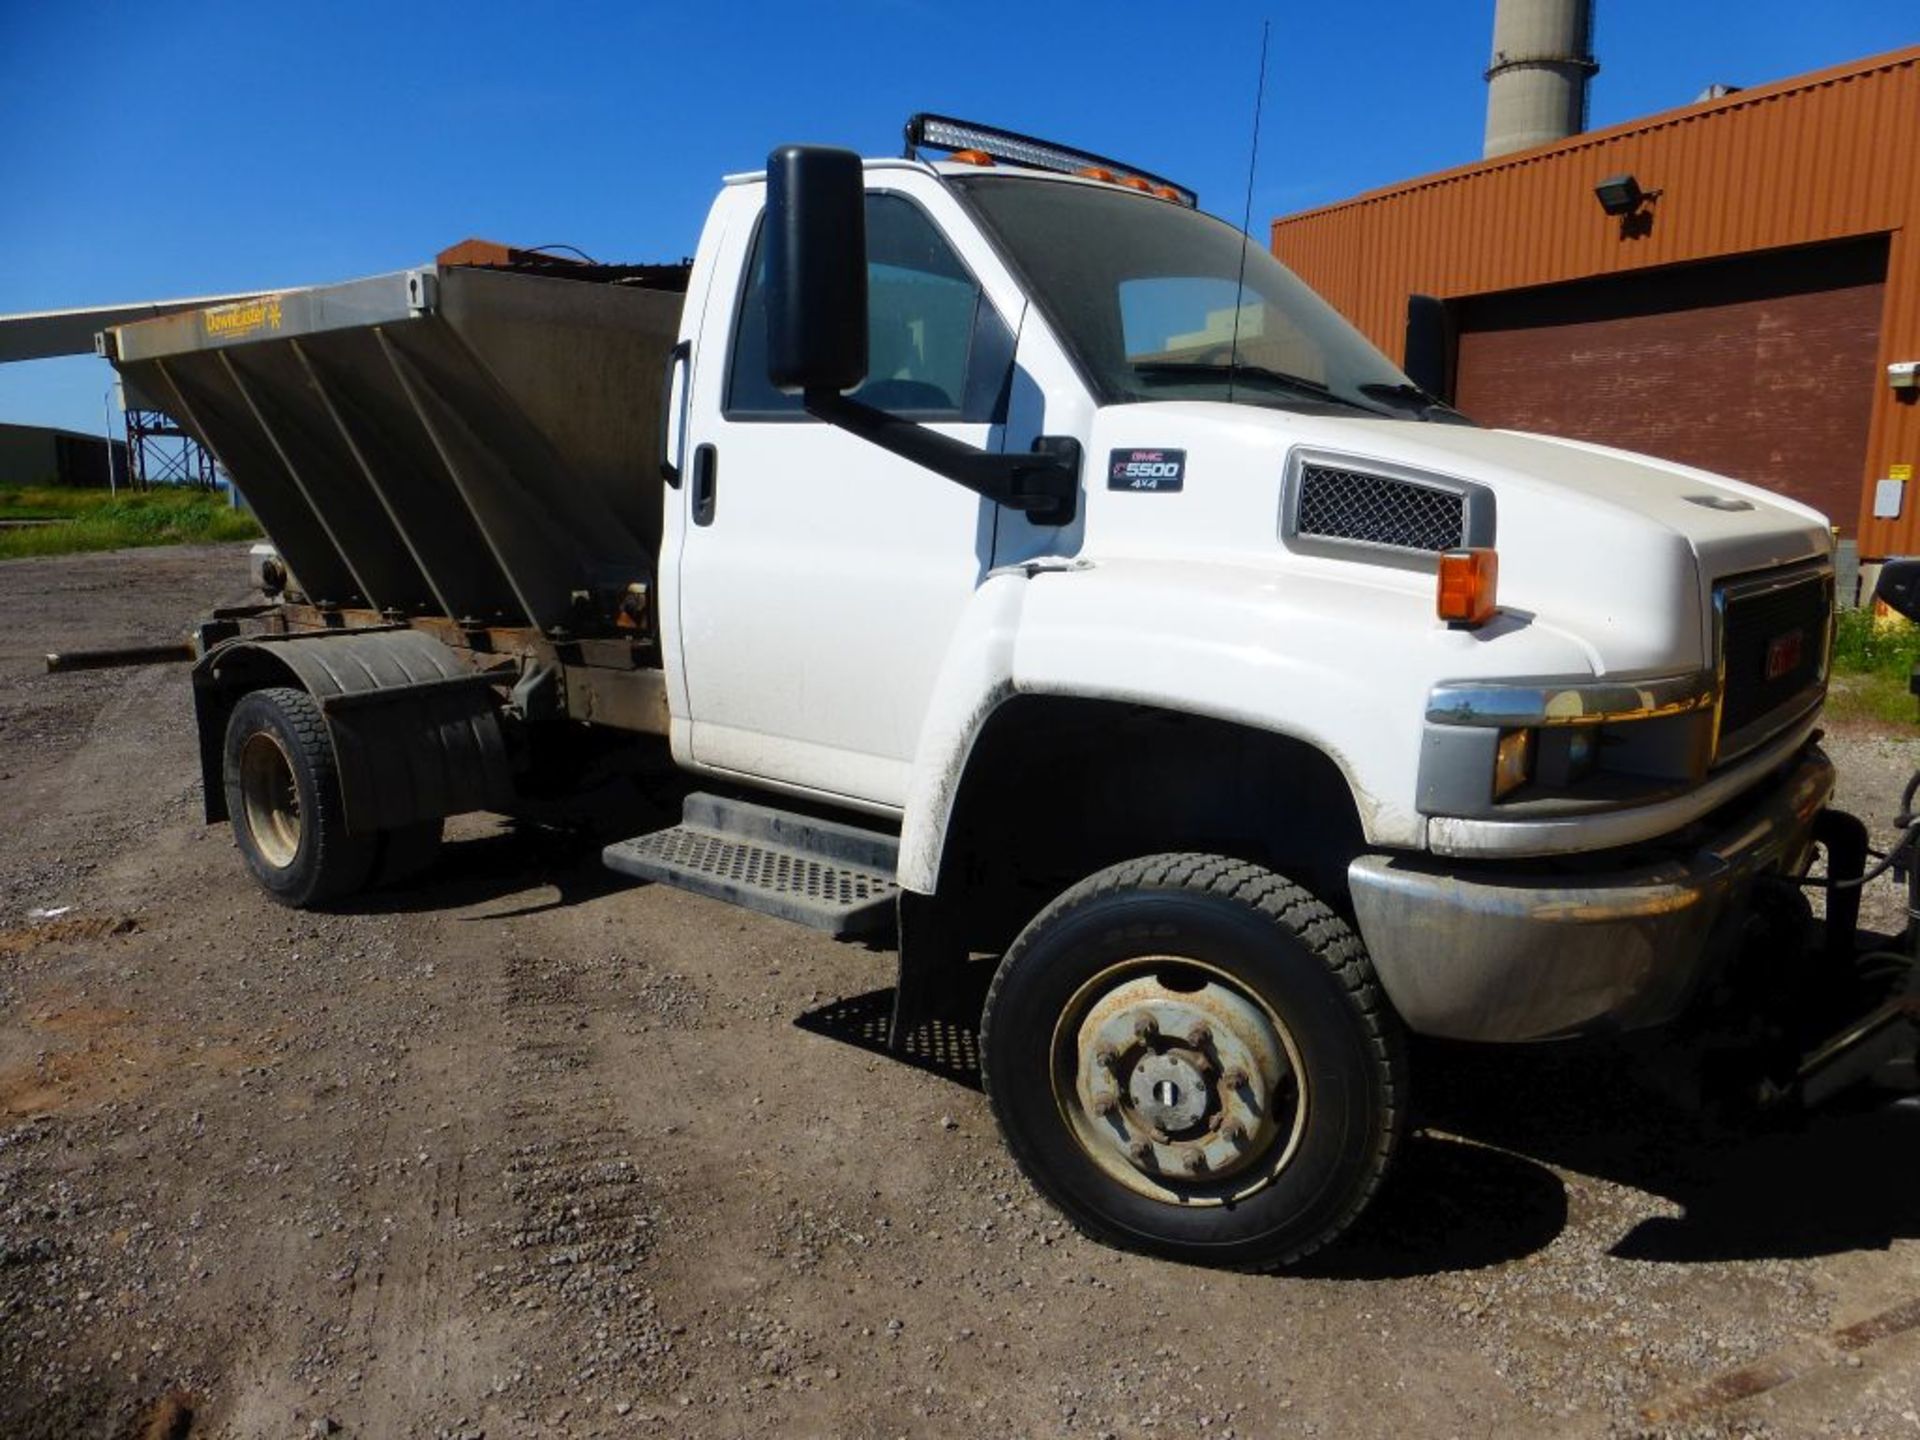 2008 GMC 5500 4x4 Plow Truck with Spreader | Vin No. 1GDE5C3G39F404627; GVWR: 19,500; 15,312 - Image 8 of 29